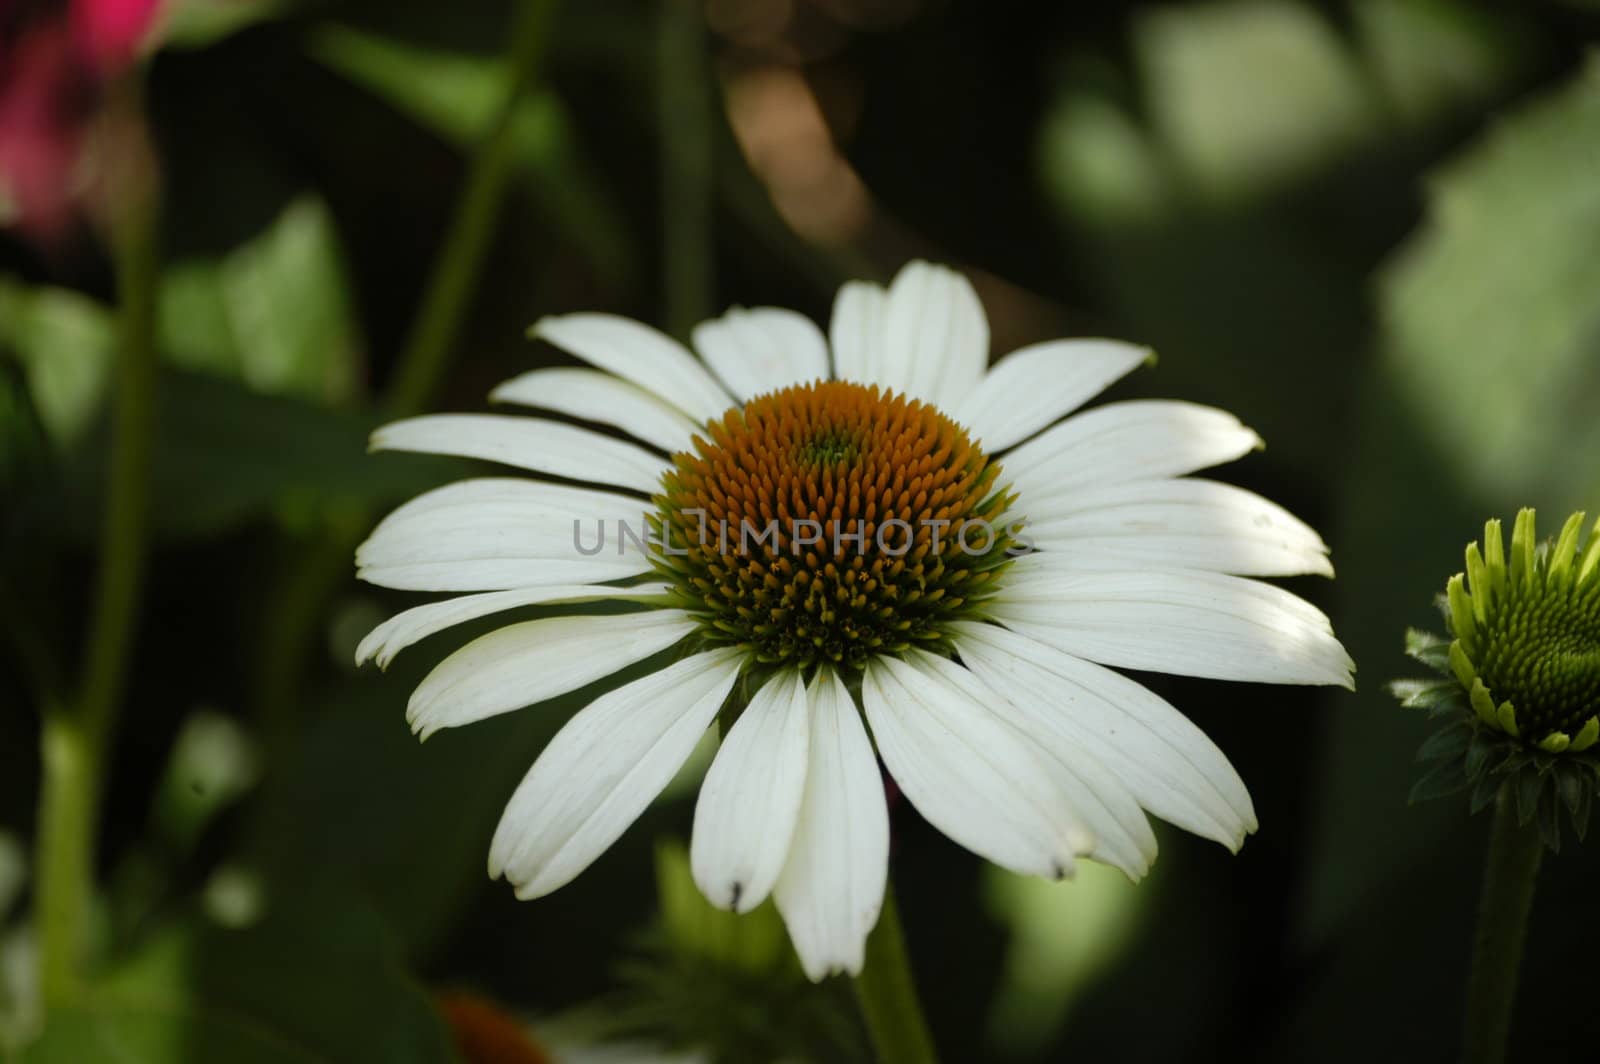 A white daisy seen up close